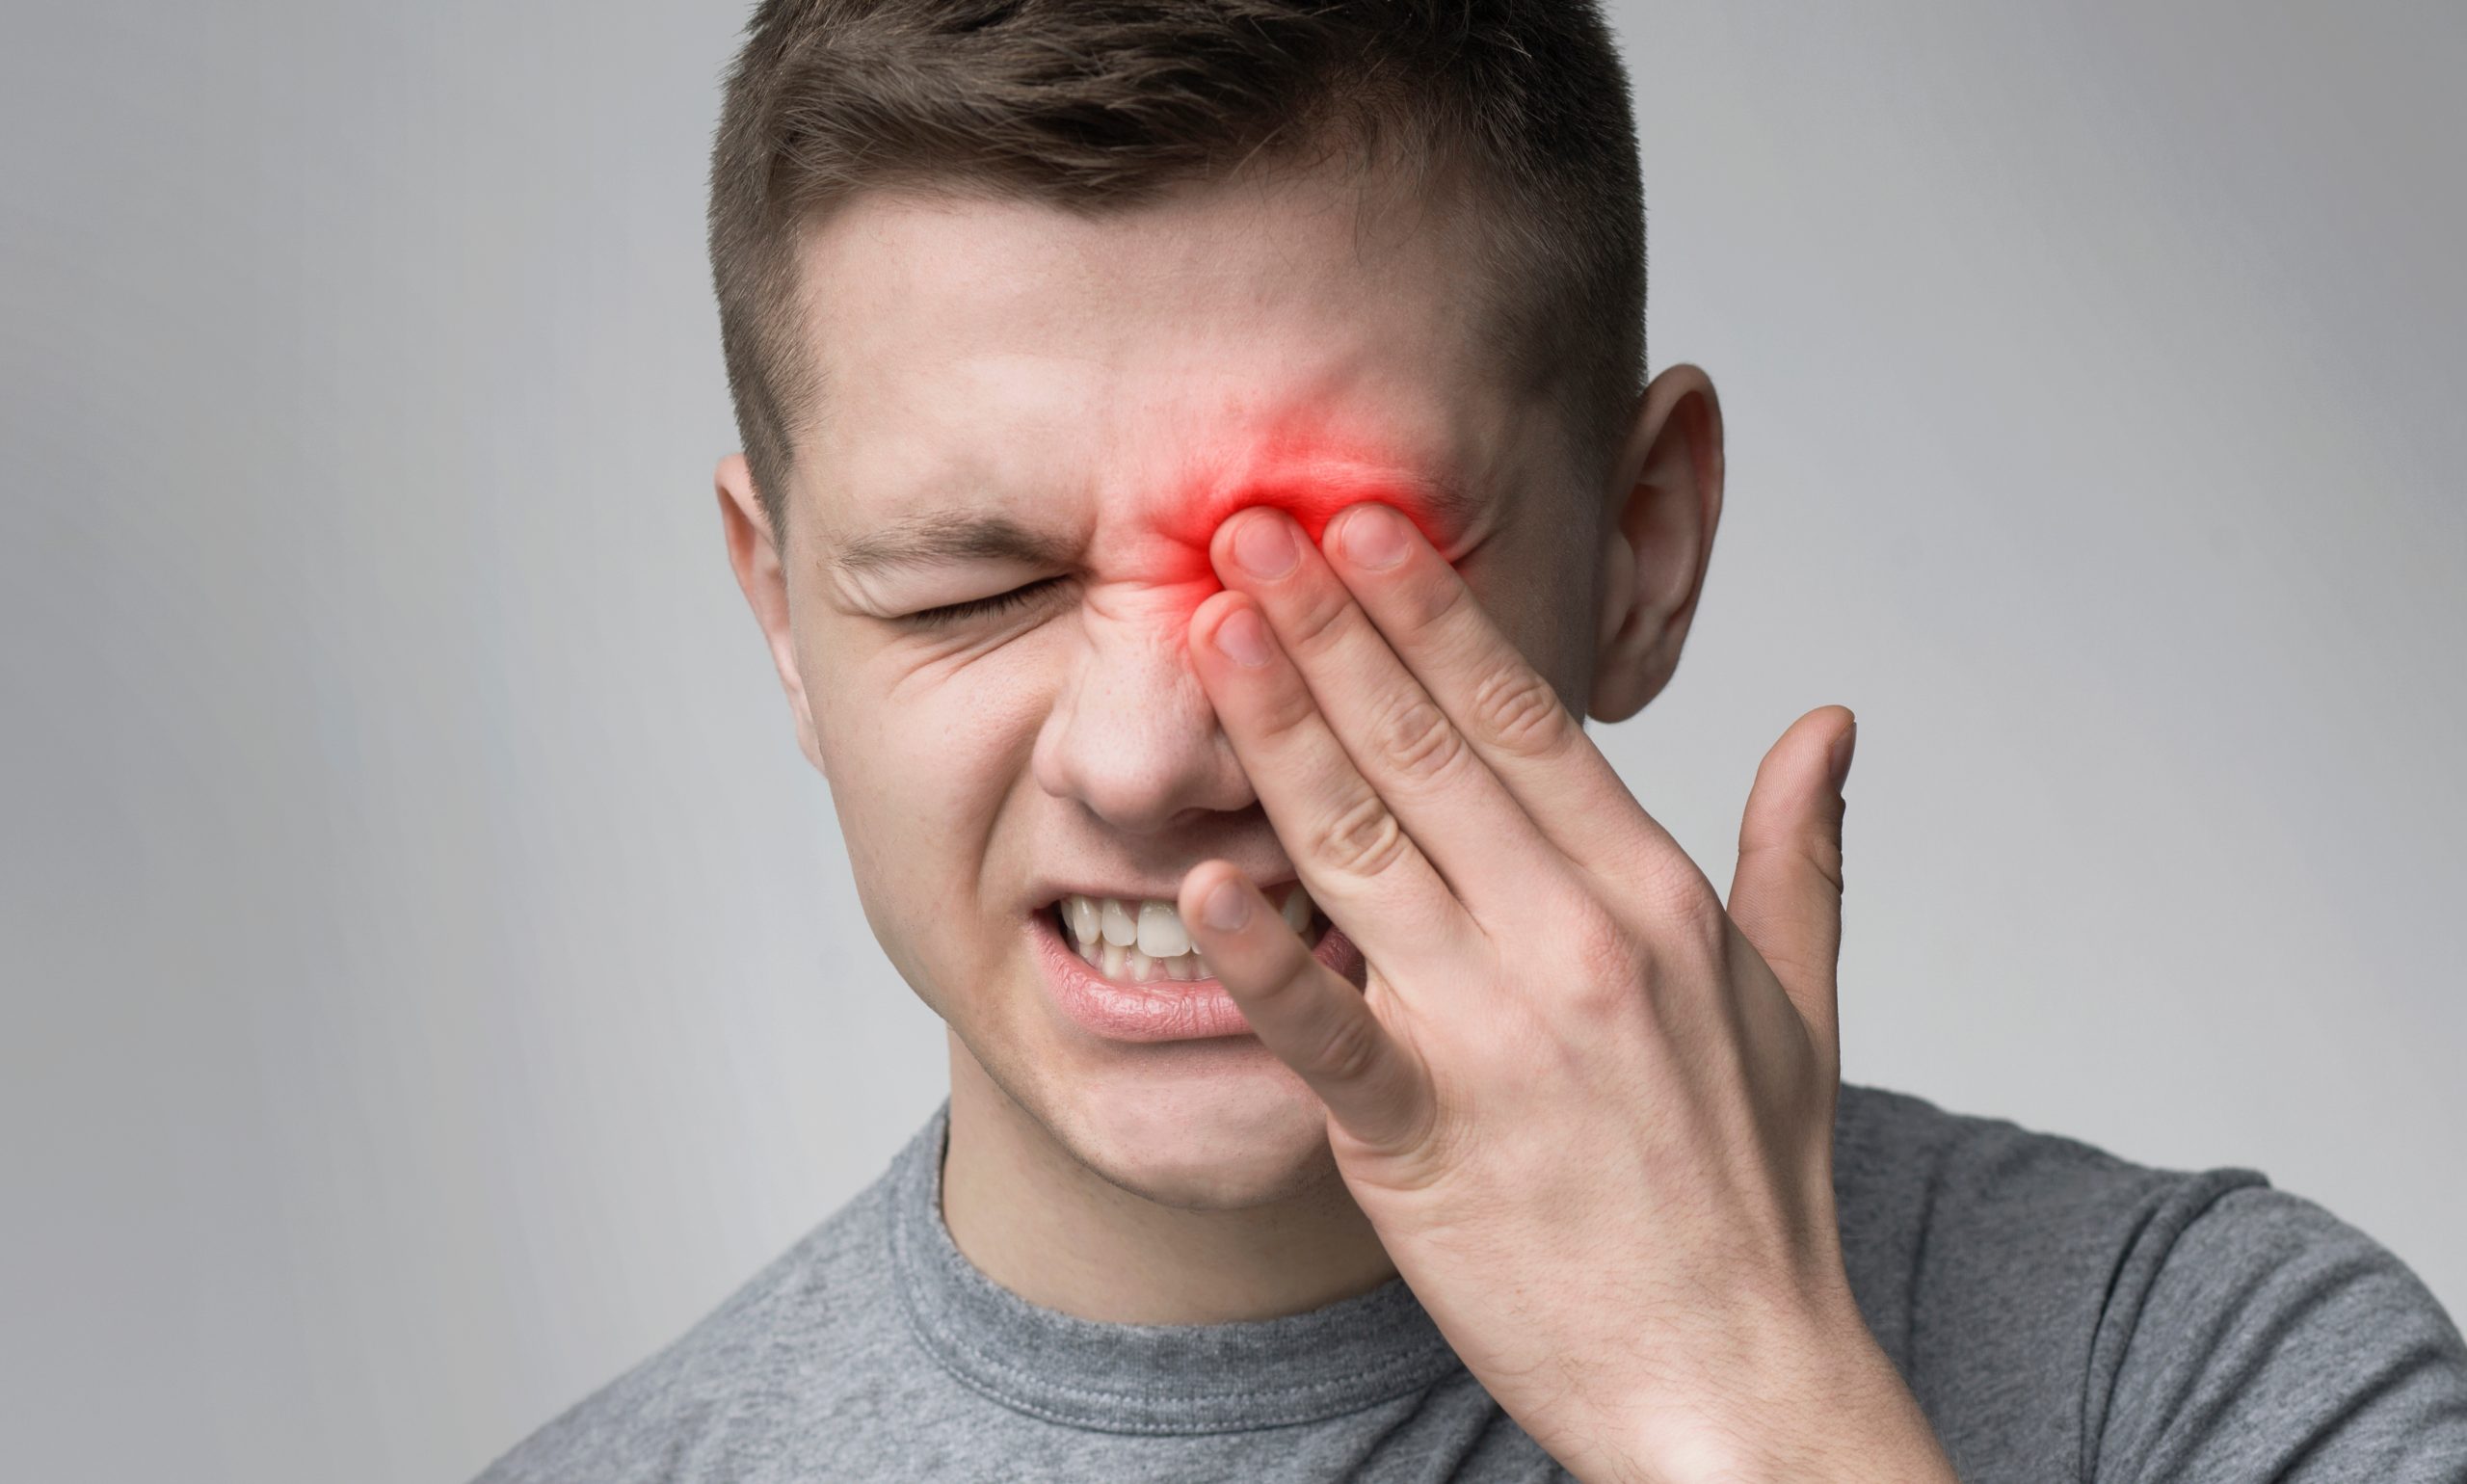 Upset man suffering from strong eye pain